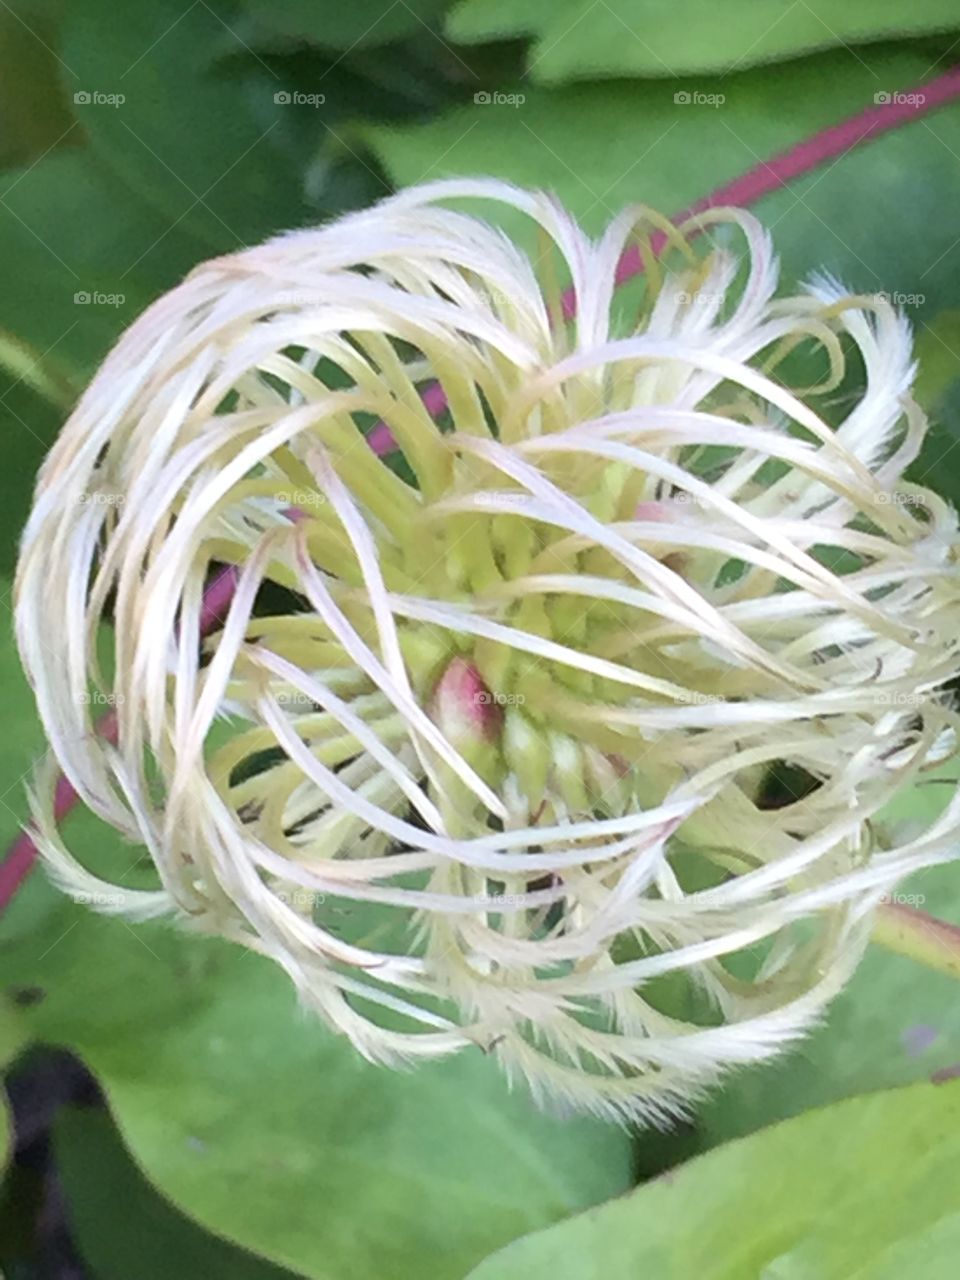 Seed structure 
This is a clematis flower that has gone to seed
